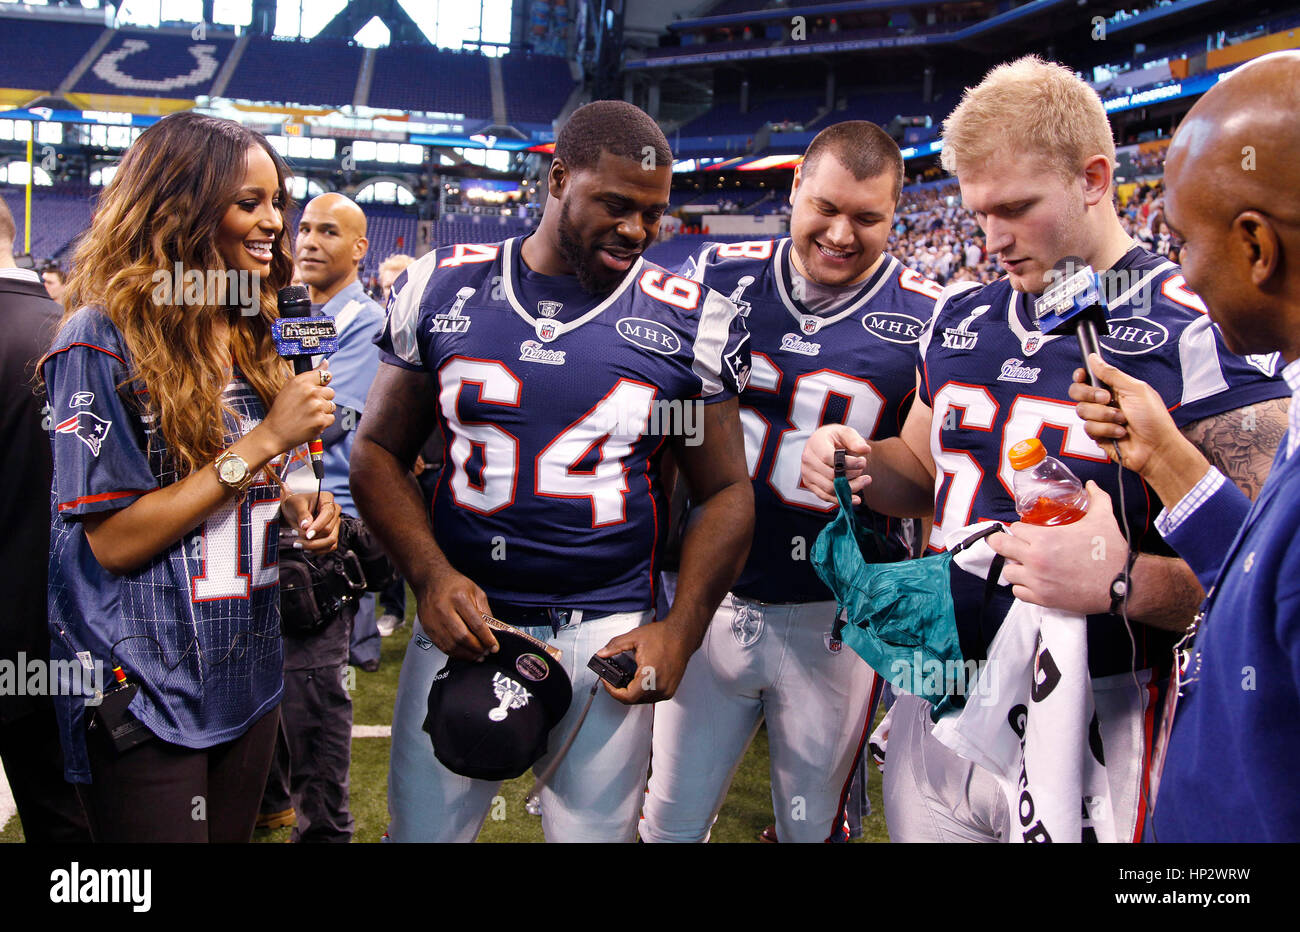 Singer Ciara with New England Patriot players, Donald Thomas (64), Matt Kopa (68) and Nick McDonald (65) who shows off a Madonna bra at the Super Bowl XLVI Media Day in Indianapolis, Indiana on January 31, 2012. Francis Specker Stock Photo